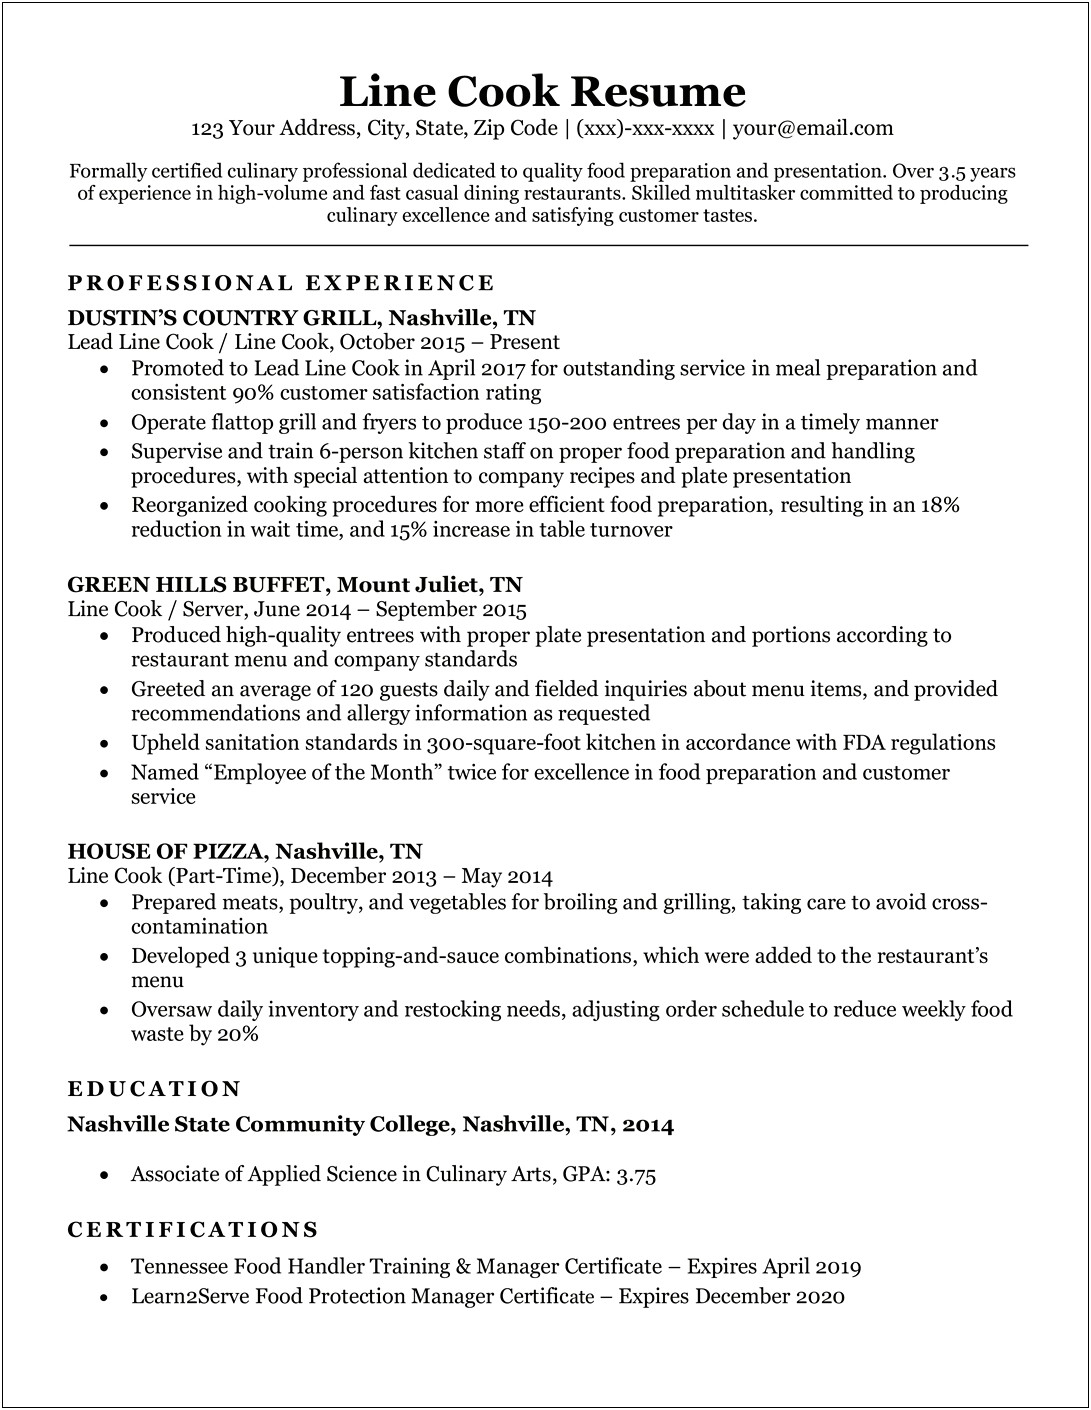 Making A Resume Out Of Fast Food Experience